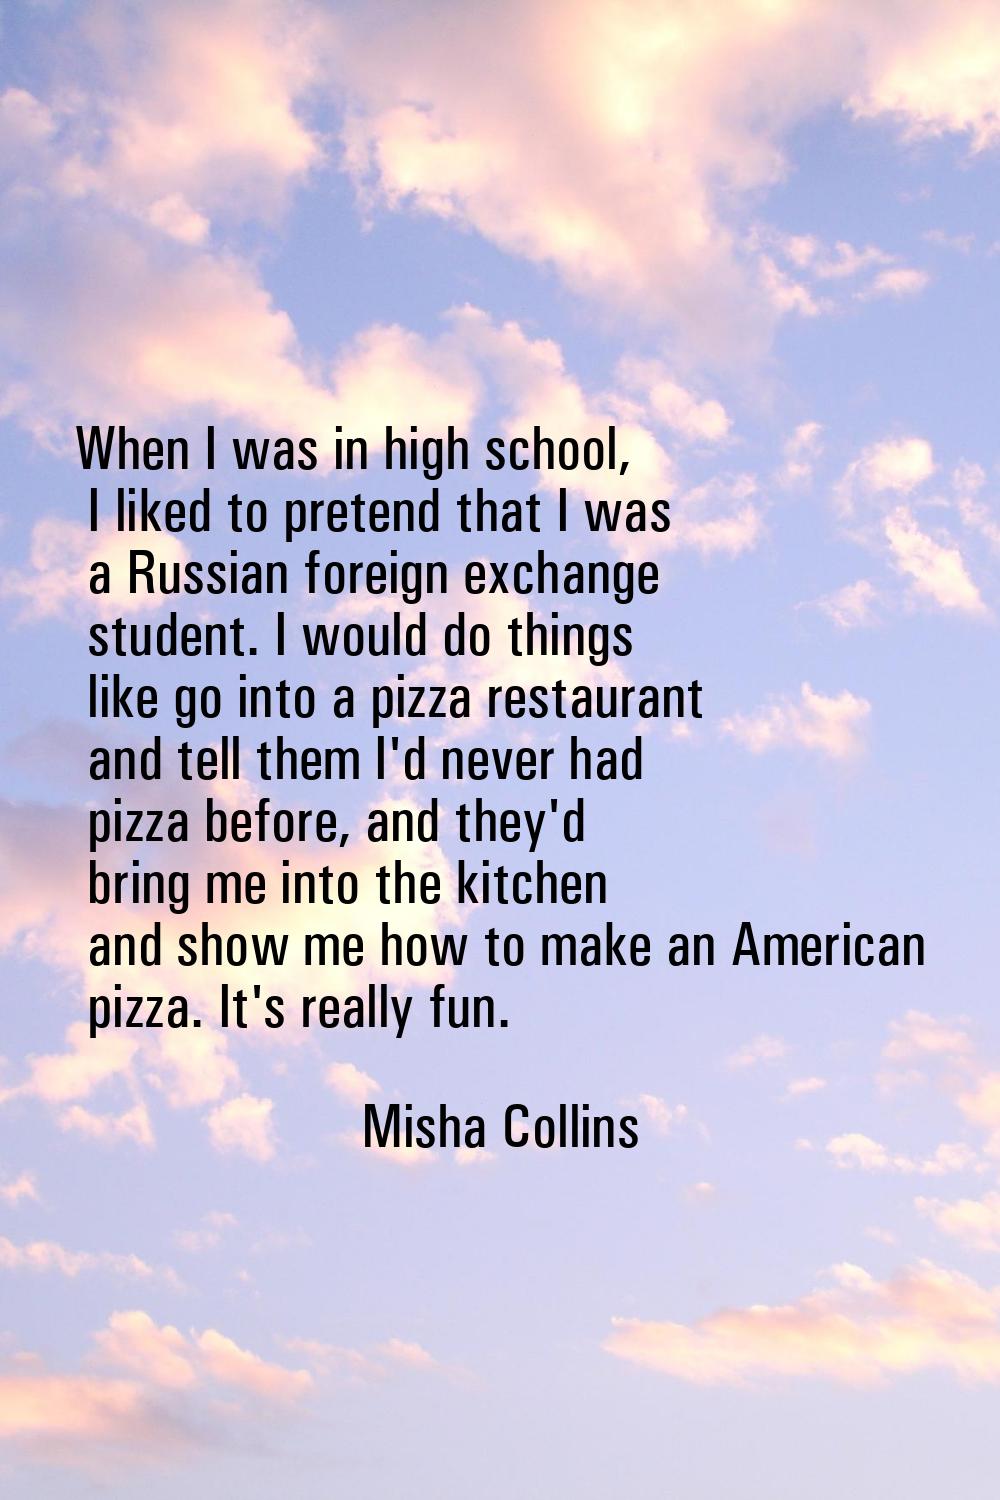 When I was in high school, I liked to pretend that I was a Russian foreign exchange student. I woul